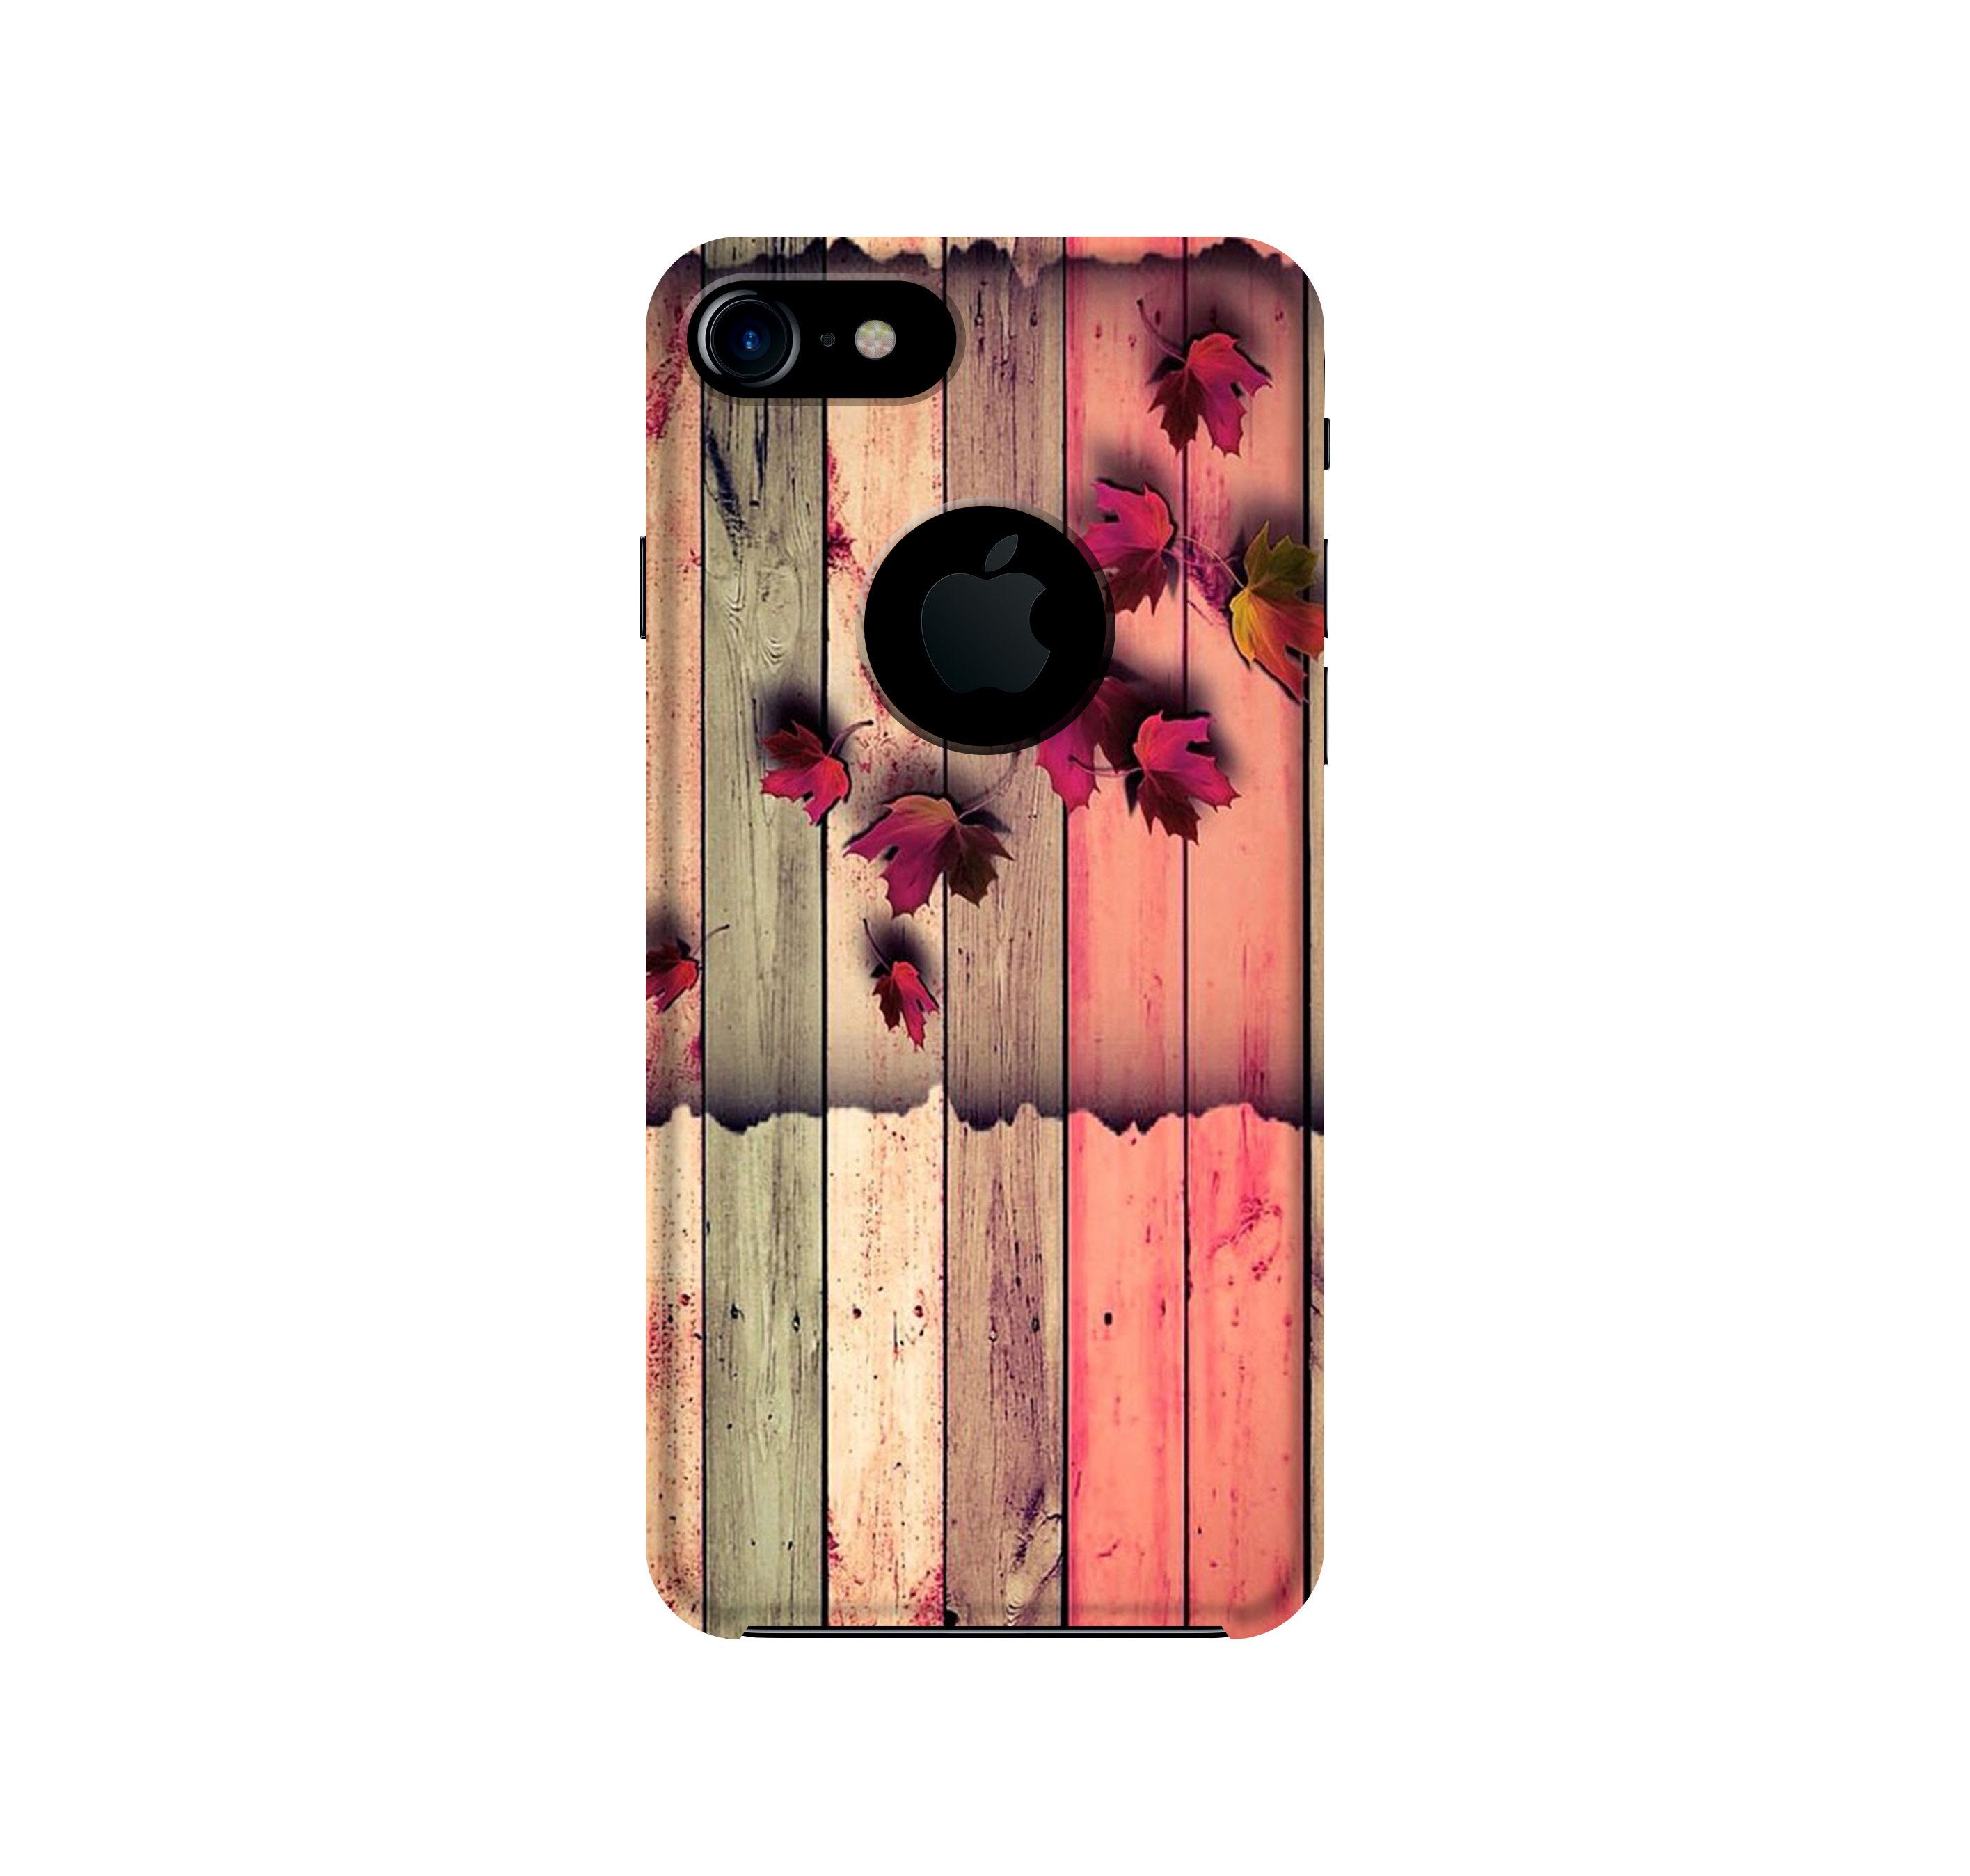 Wooden look2 Case for iPhone 7 logo cut